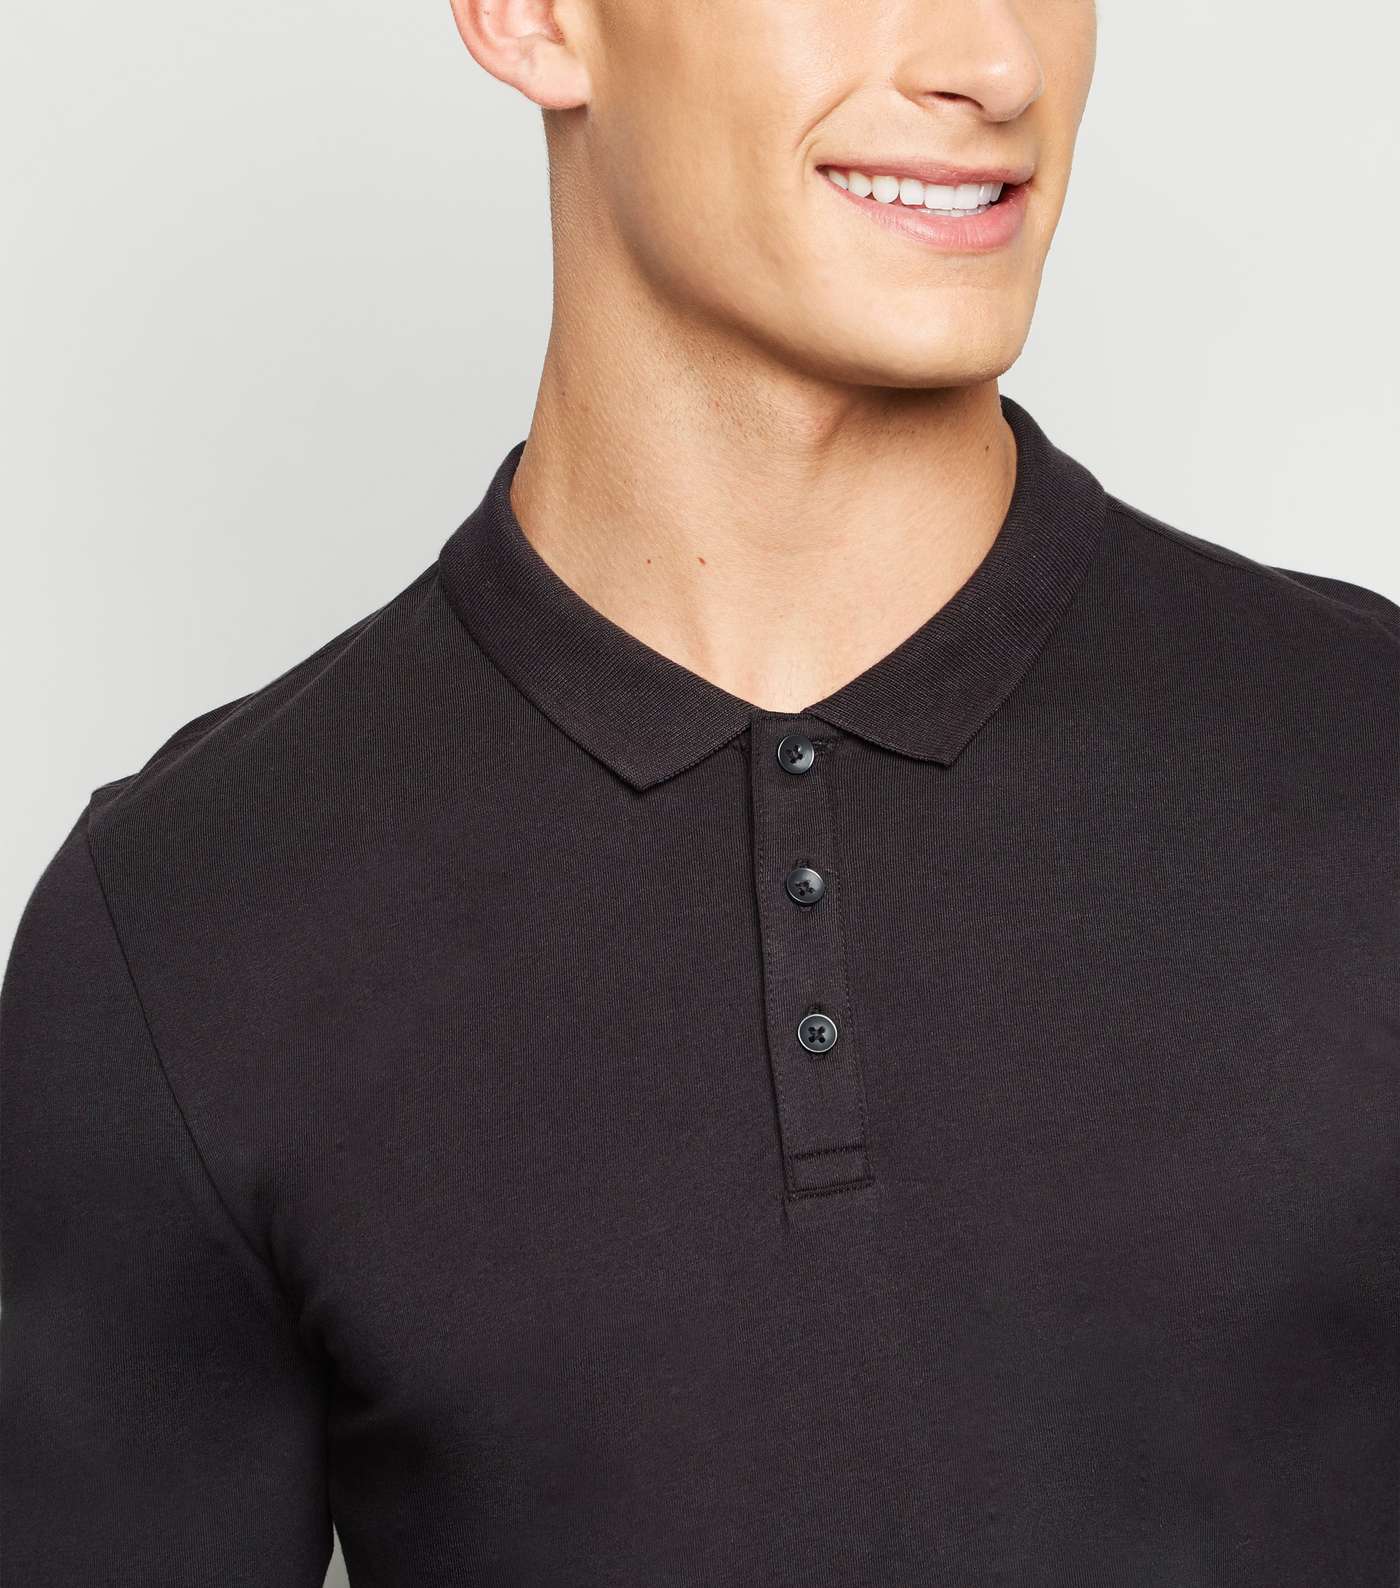 Dark Grey Long Sleeve Muscle Fit Polo Shirt Image 5